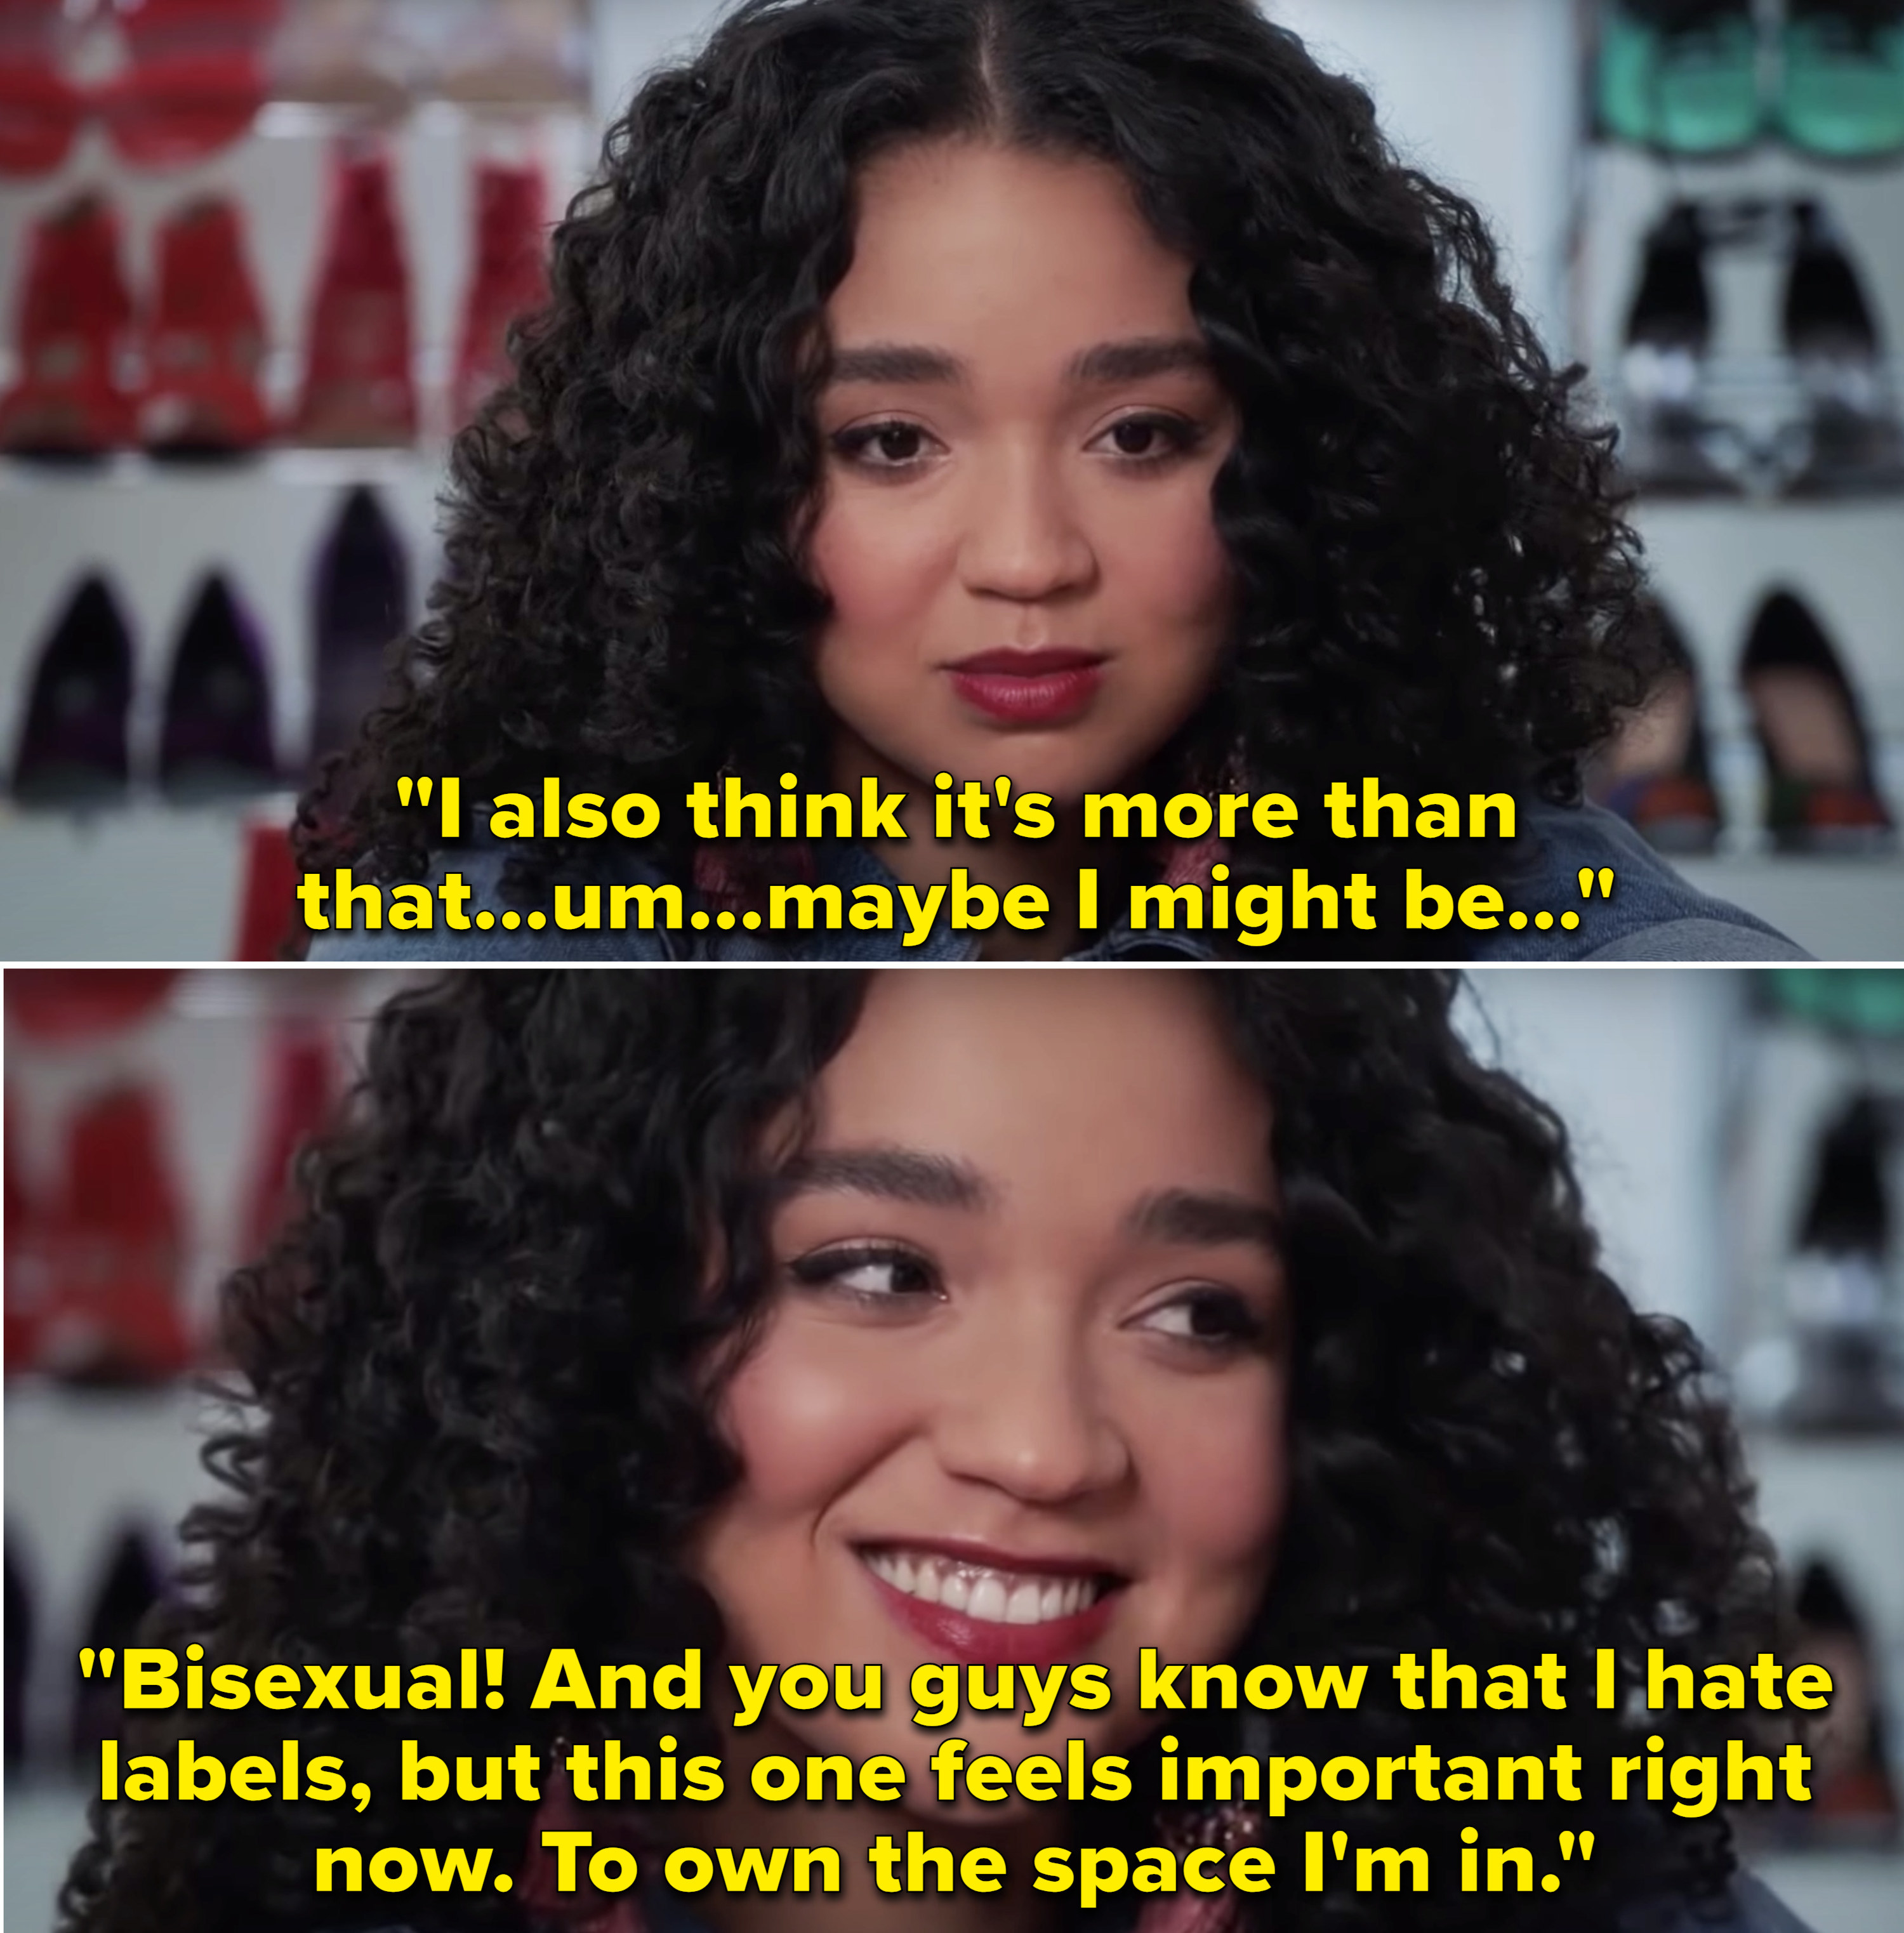 Kat saying that she&#x27;s bisexual, and how this label feels important